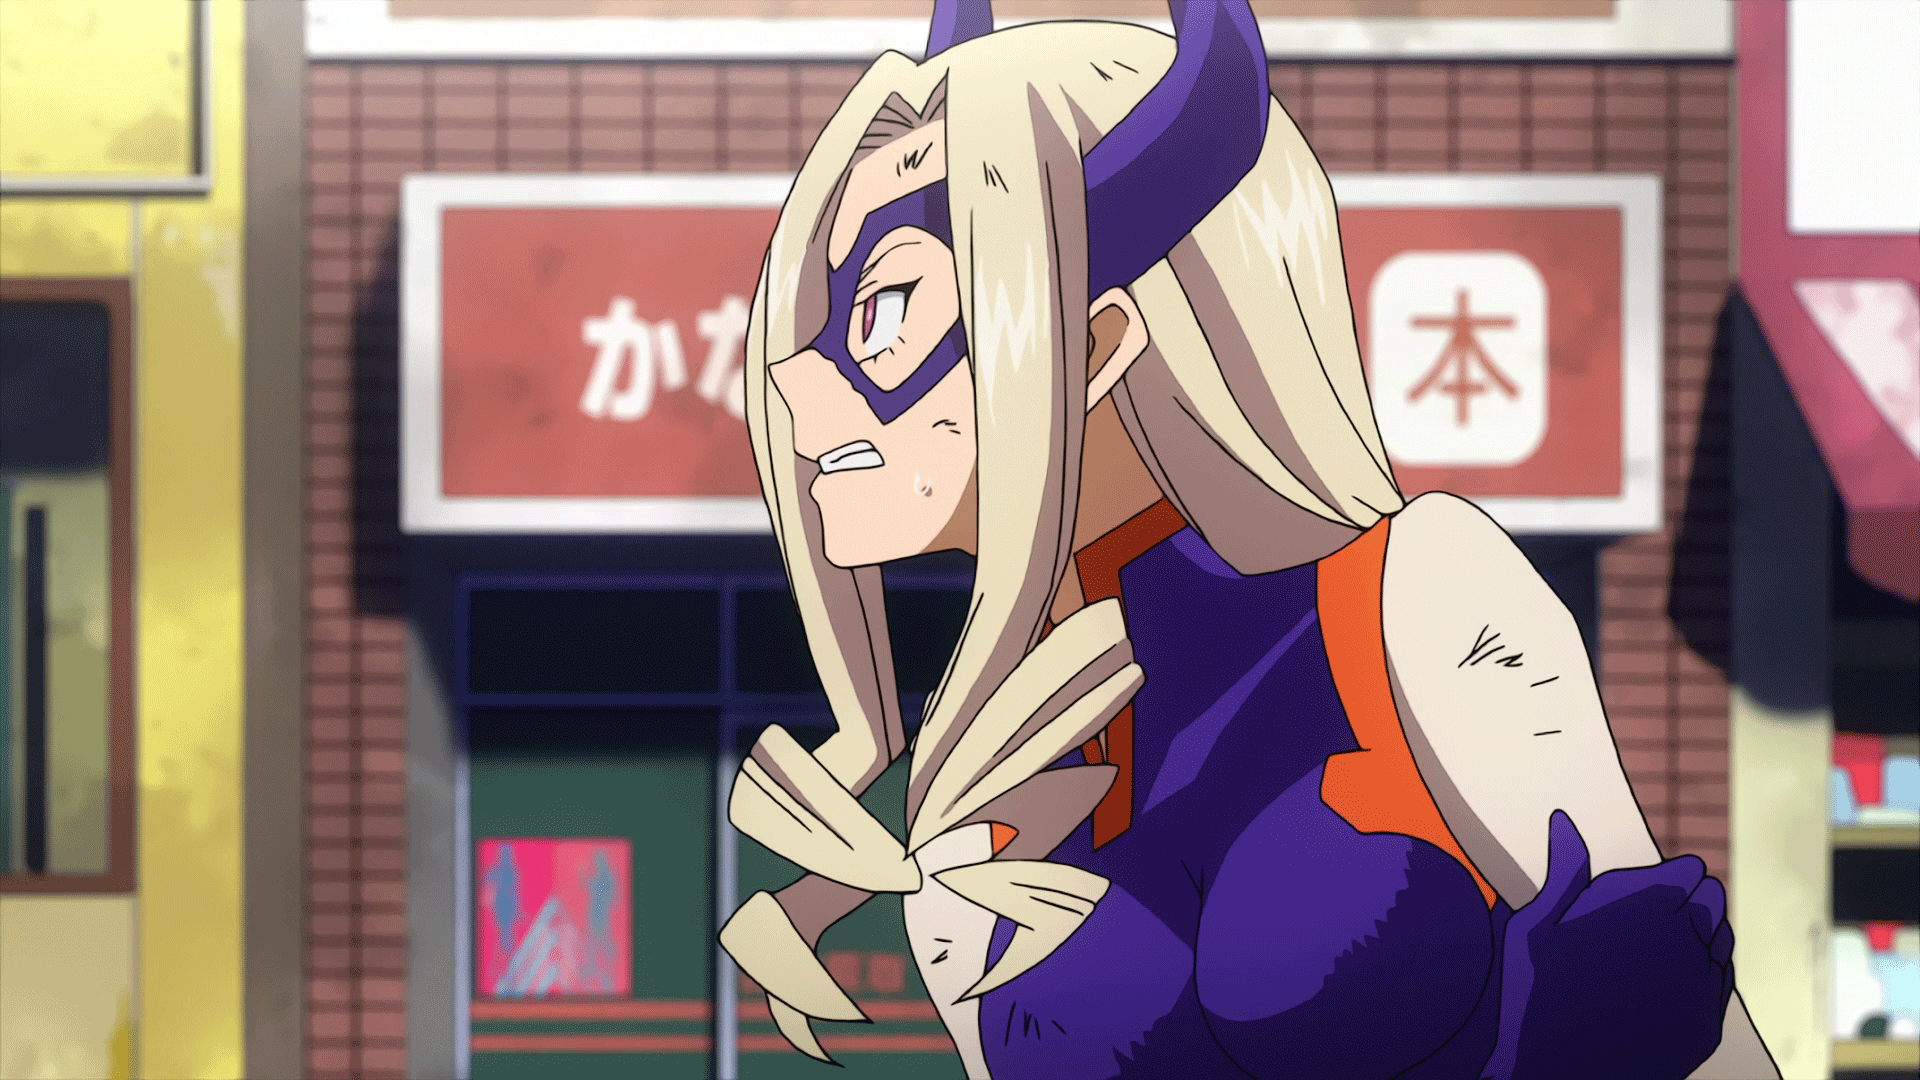 mt. lady wallpaper hero academia characters, my hero on mt lady wallpapers